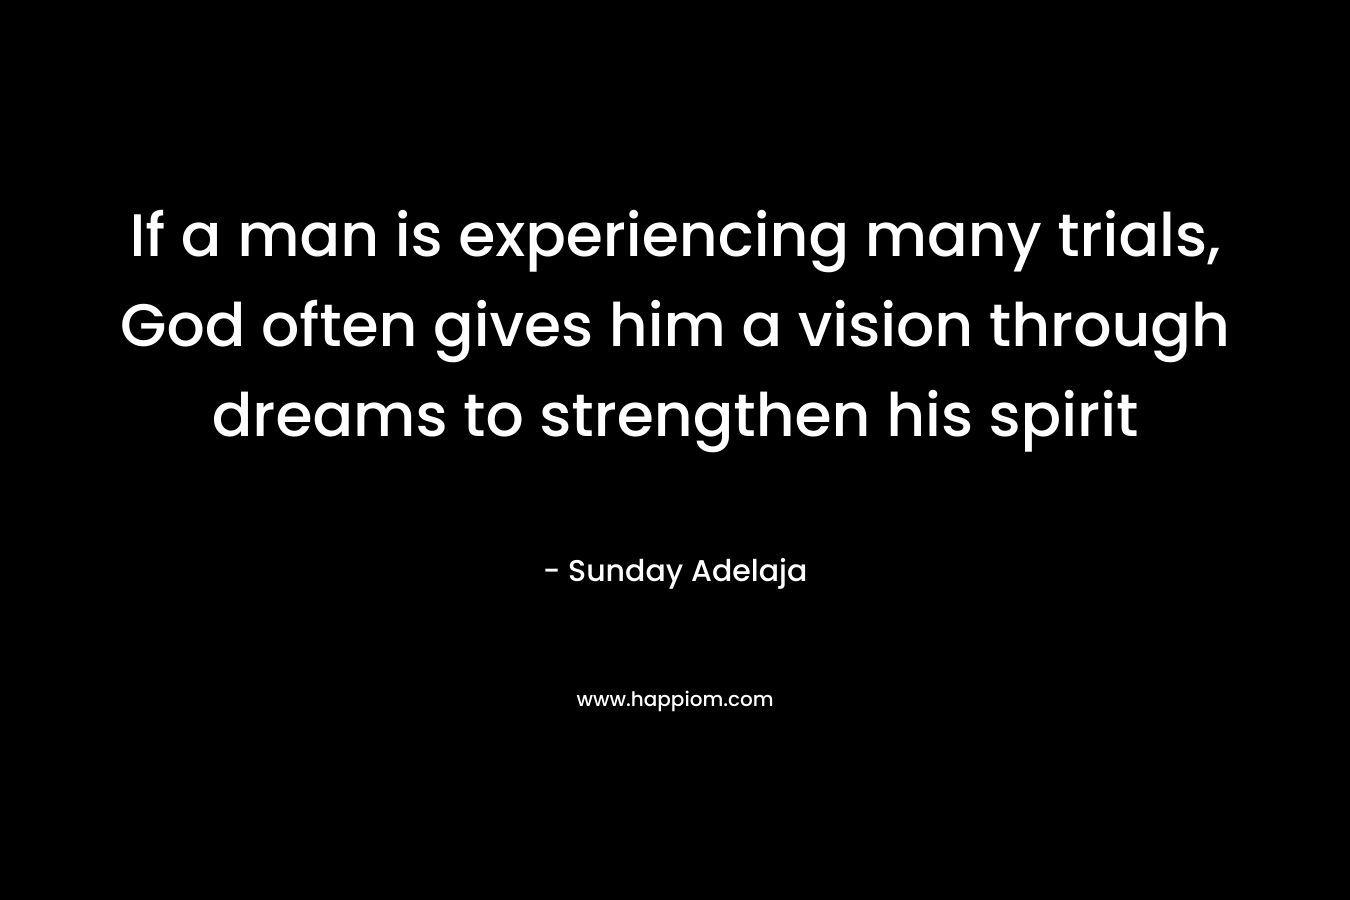 If a man is experiencing many trials, God often gives him a vision through dreams to strengthen his spirit